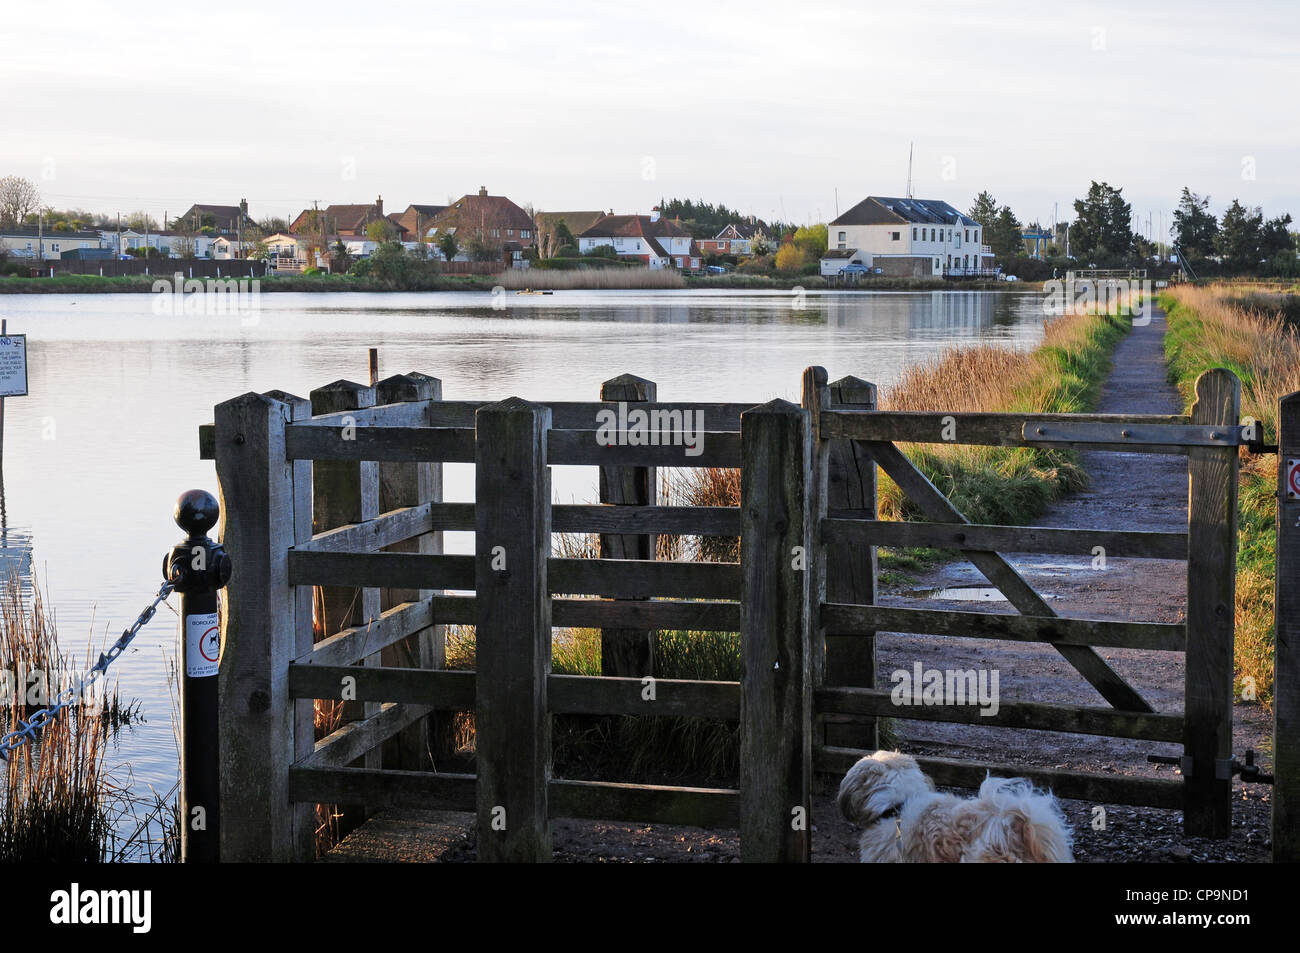 Kissing-gate at entrance to footpath. Slipper Mill Pond. Emsworth. Early morning. Shih Tzu dog. Stock Photo